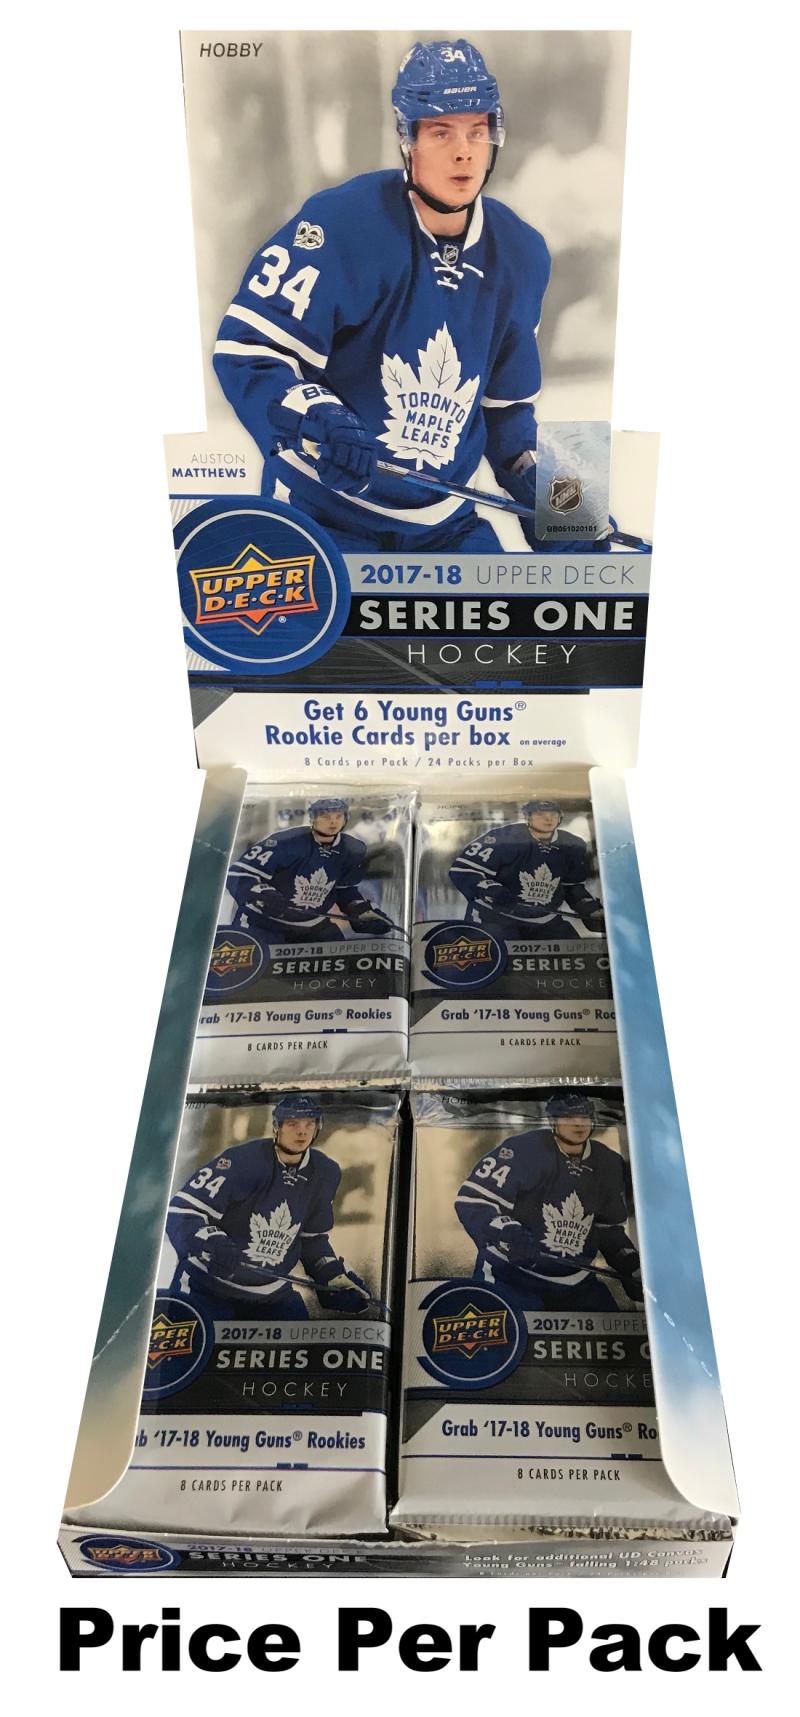 2017-18 Upper Deck Series 1 Hobby Pack - Hischier, McAvoy, Patrick YG & More Image 1